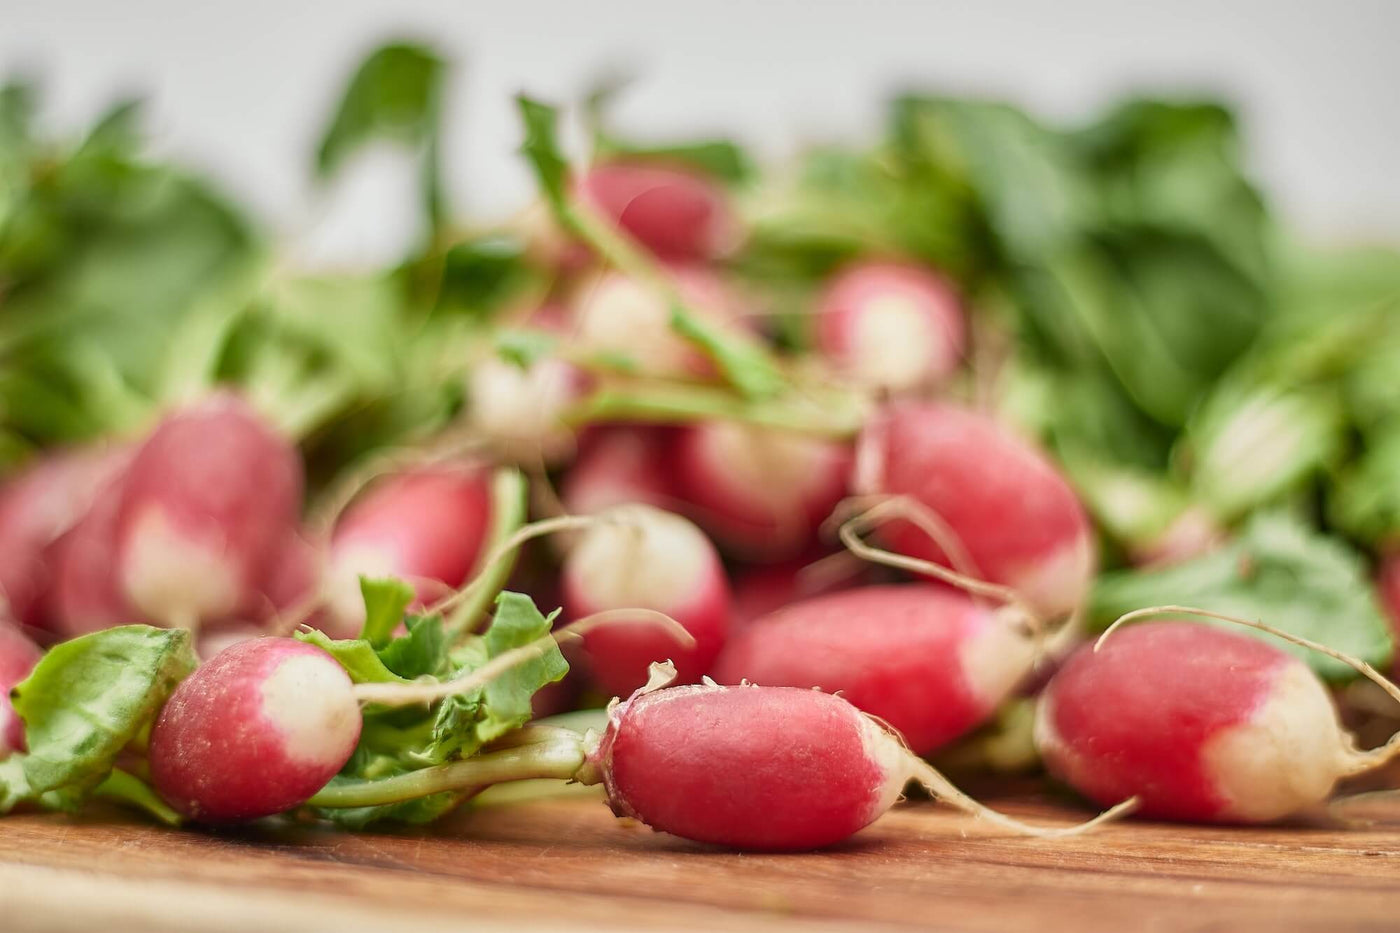 Radish seeds grown to radishes on a wooden table